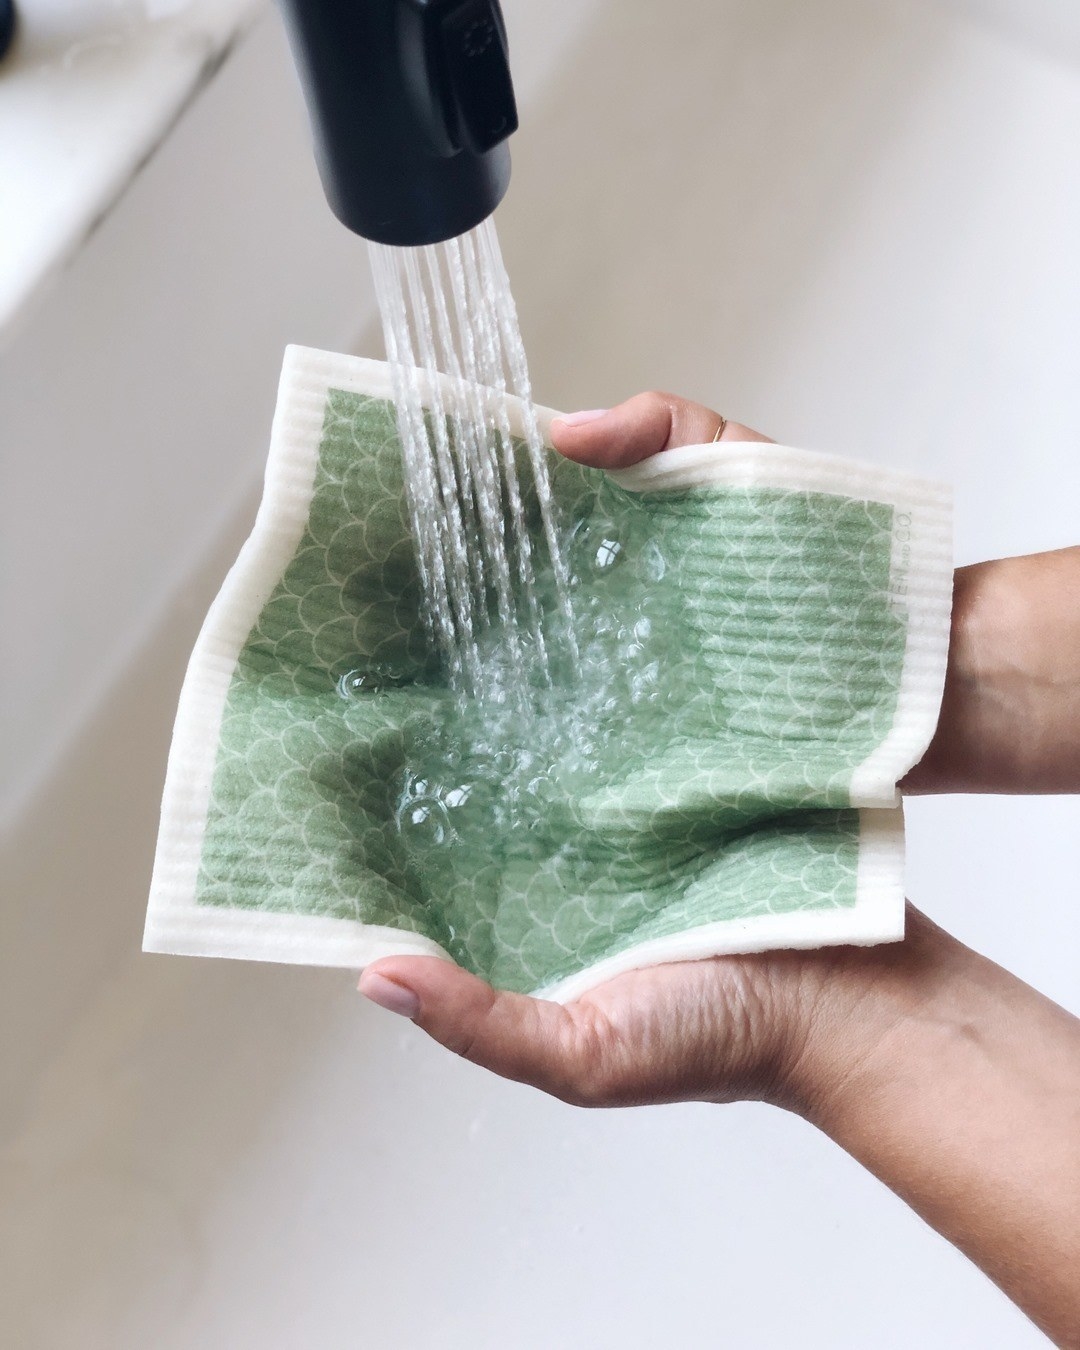 square cloth with green scale-like design in a pair of hands under a faucet